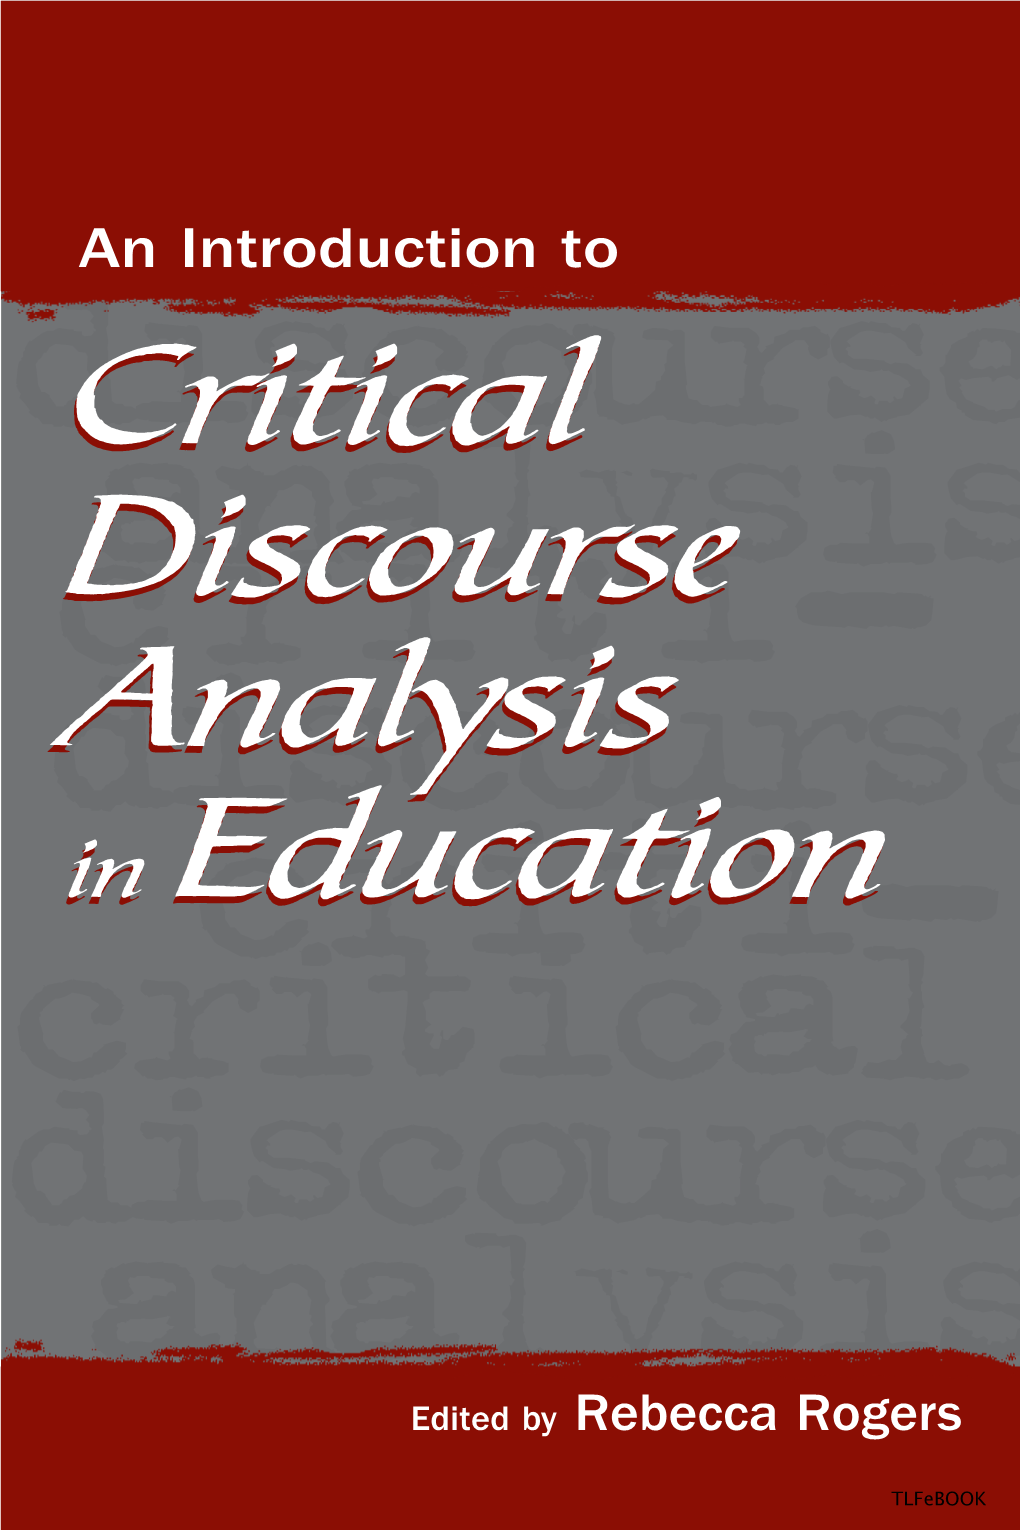 An Intoduction to Critical Discourse Analysis in Education